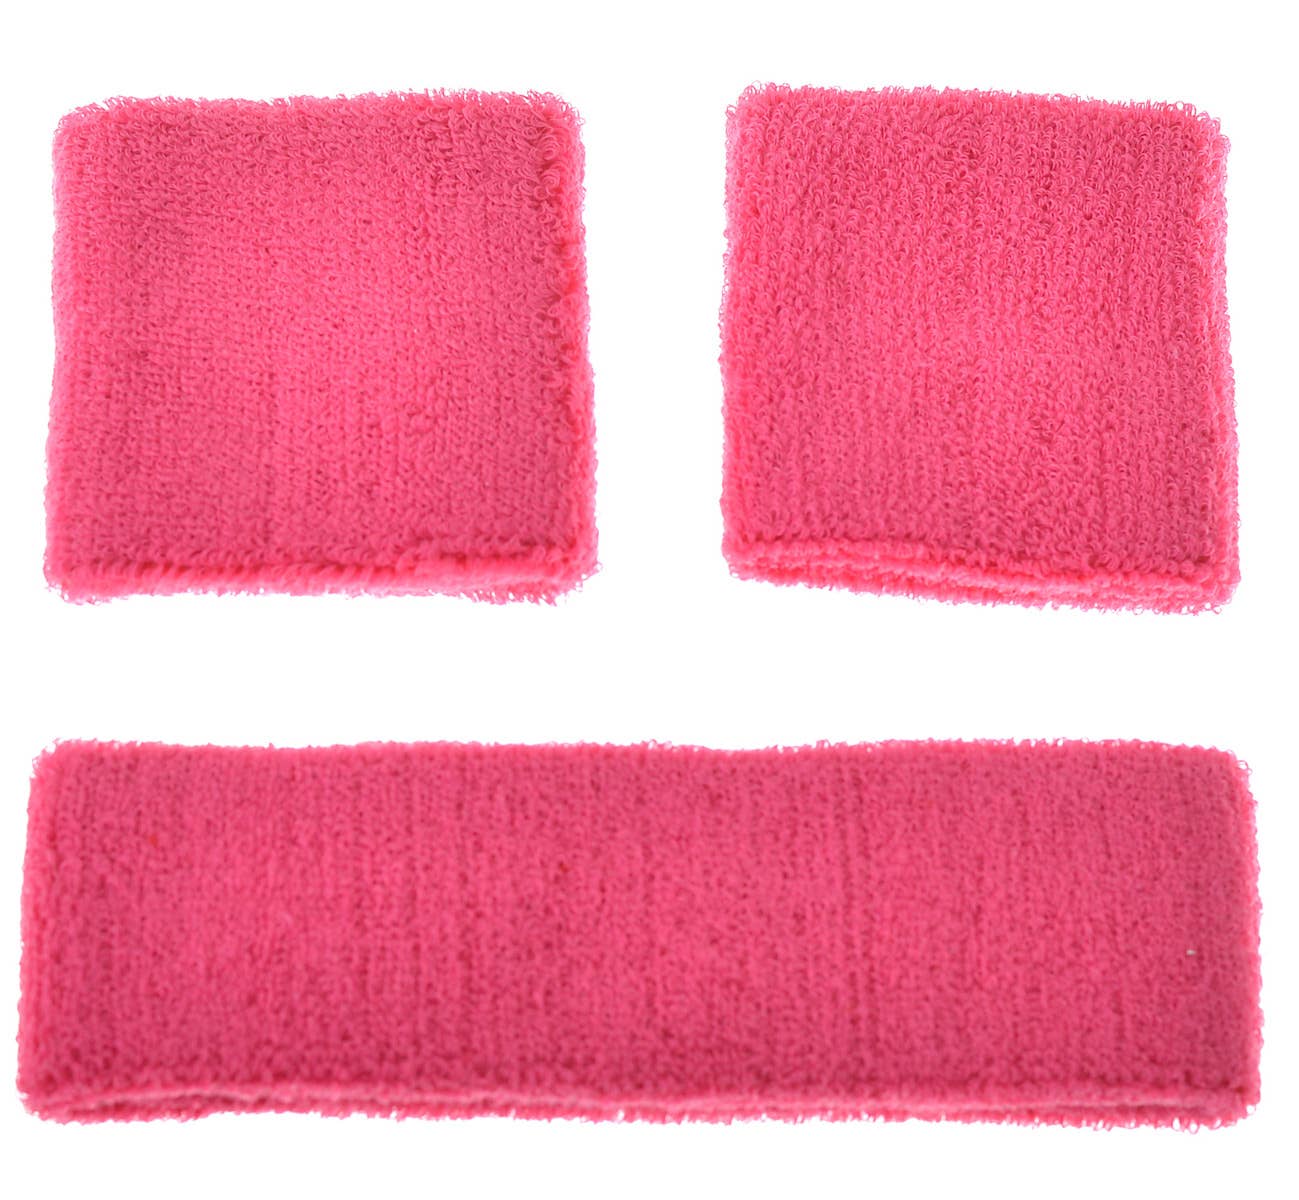 Bright Pink Sports Wrist and Head Sweat Bands 80s Costume Accessories - Close up Image